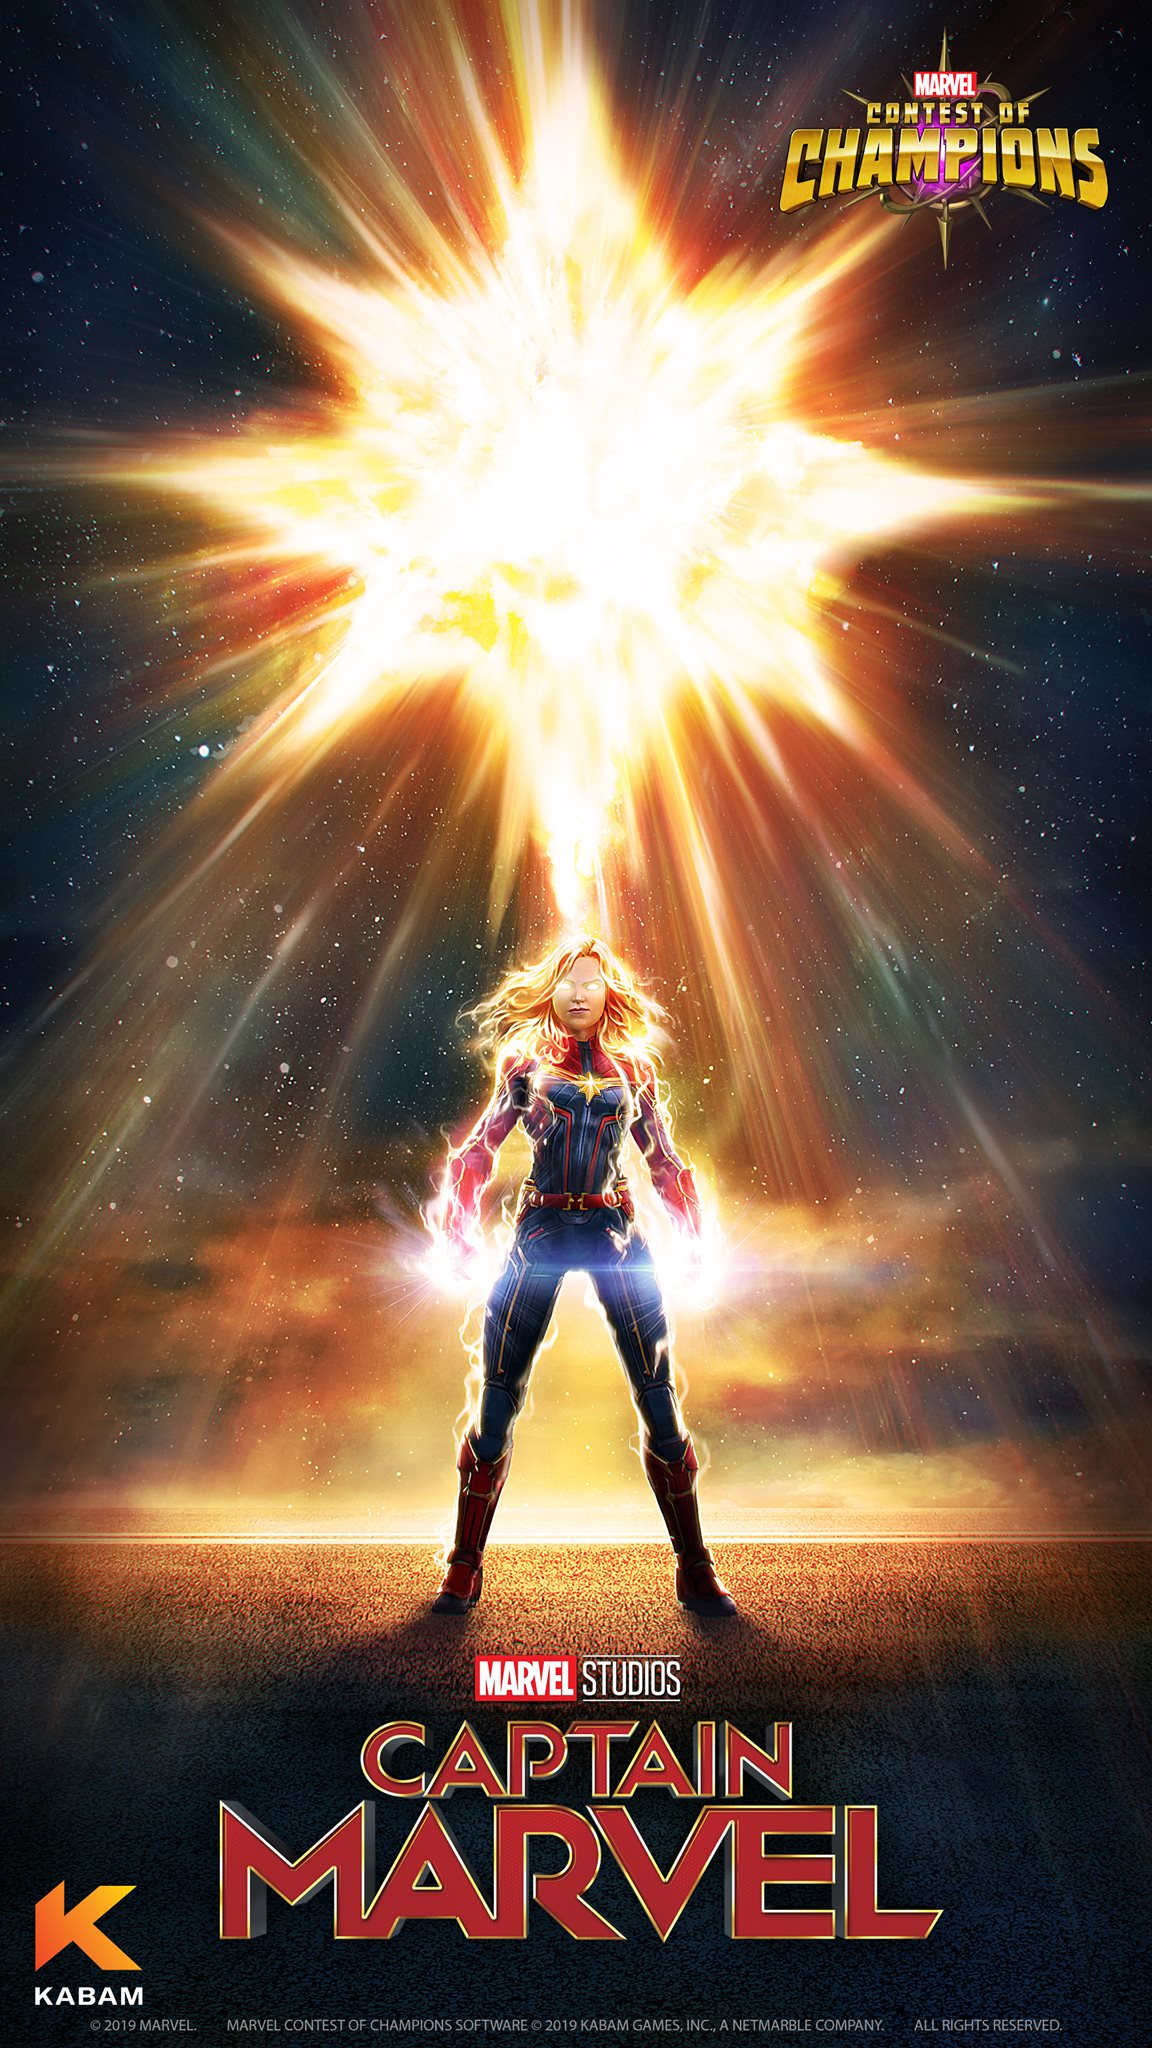 Captain Marvel, MS Marvel, and Kamala Khan Wallpapers - MCOC Guide